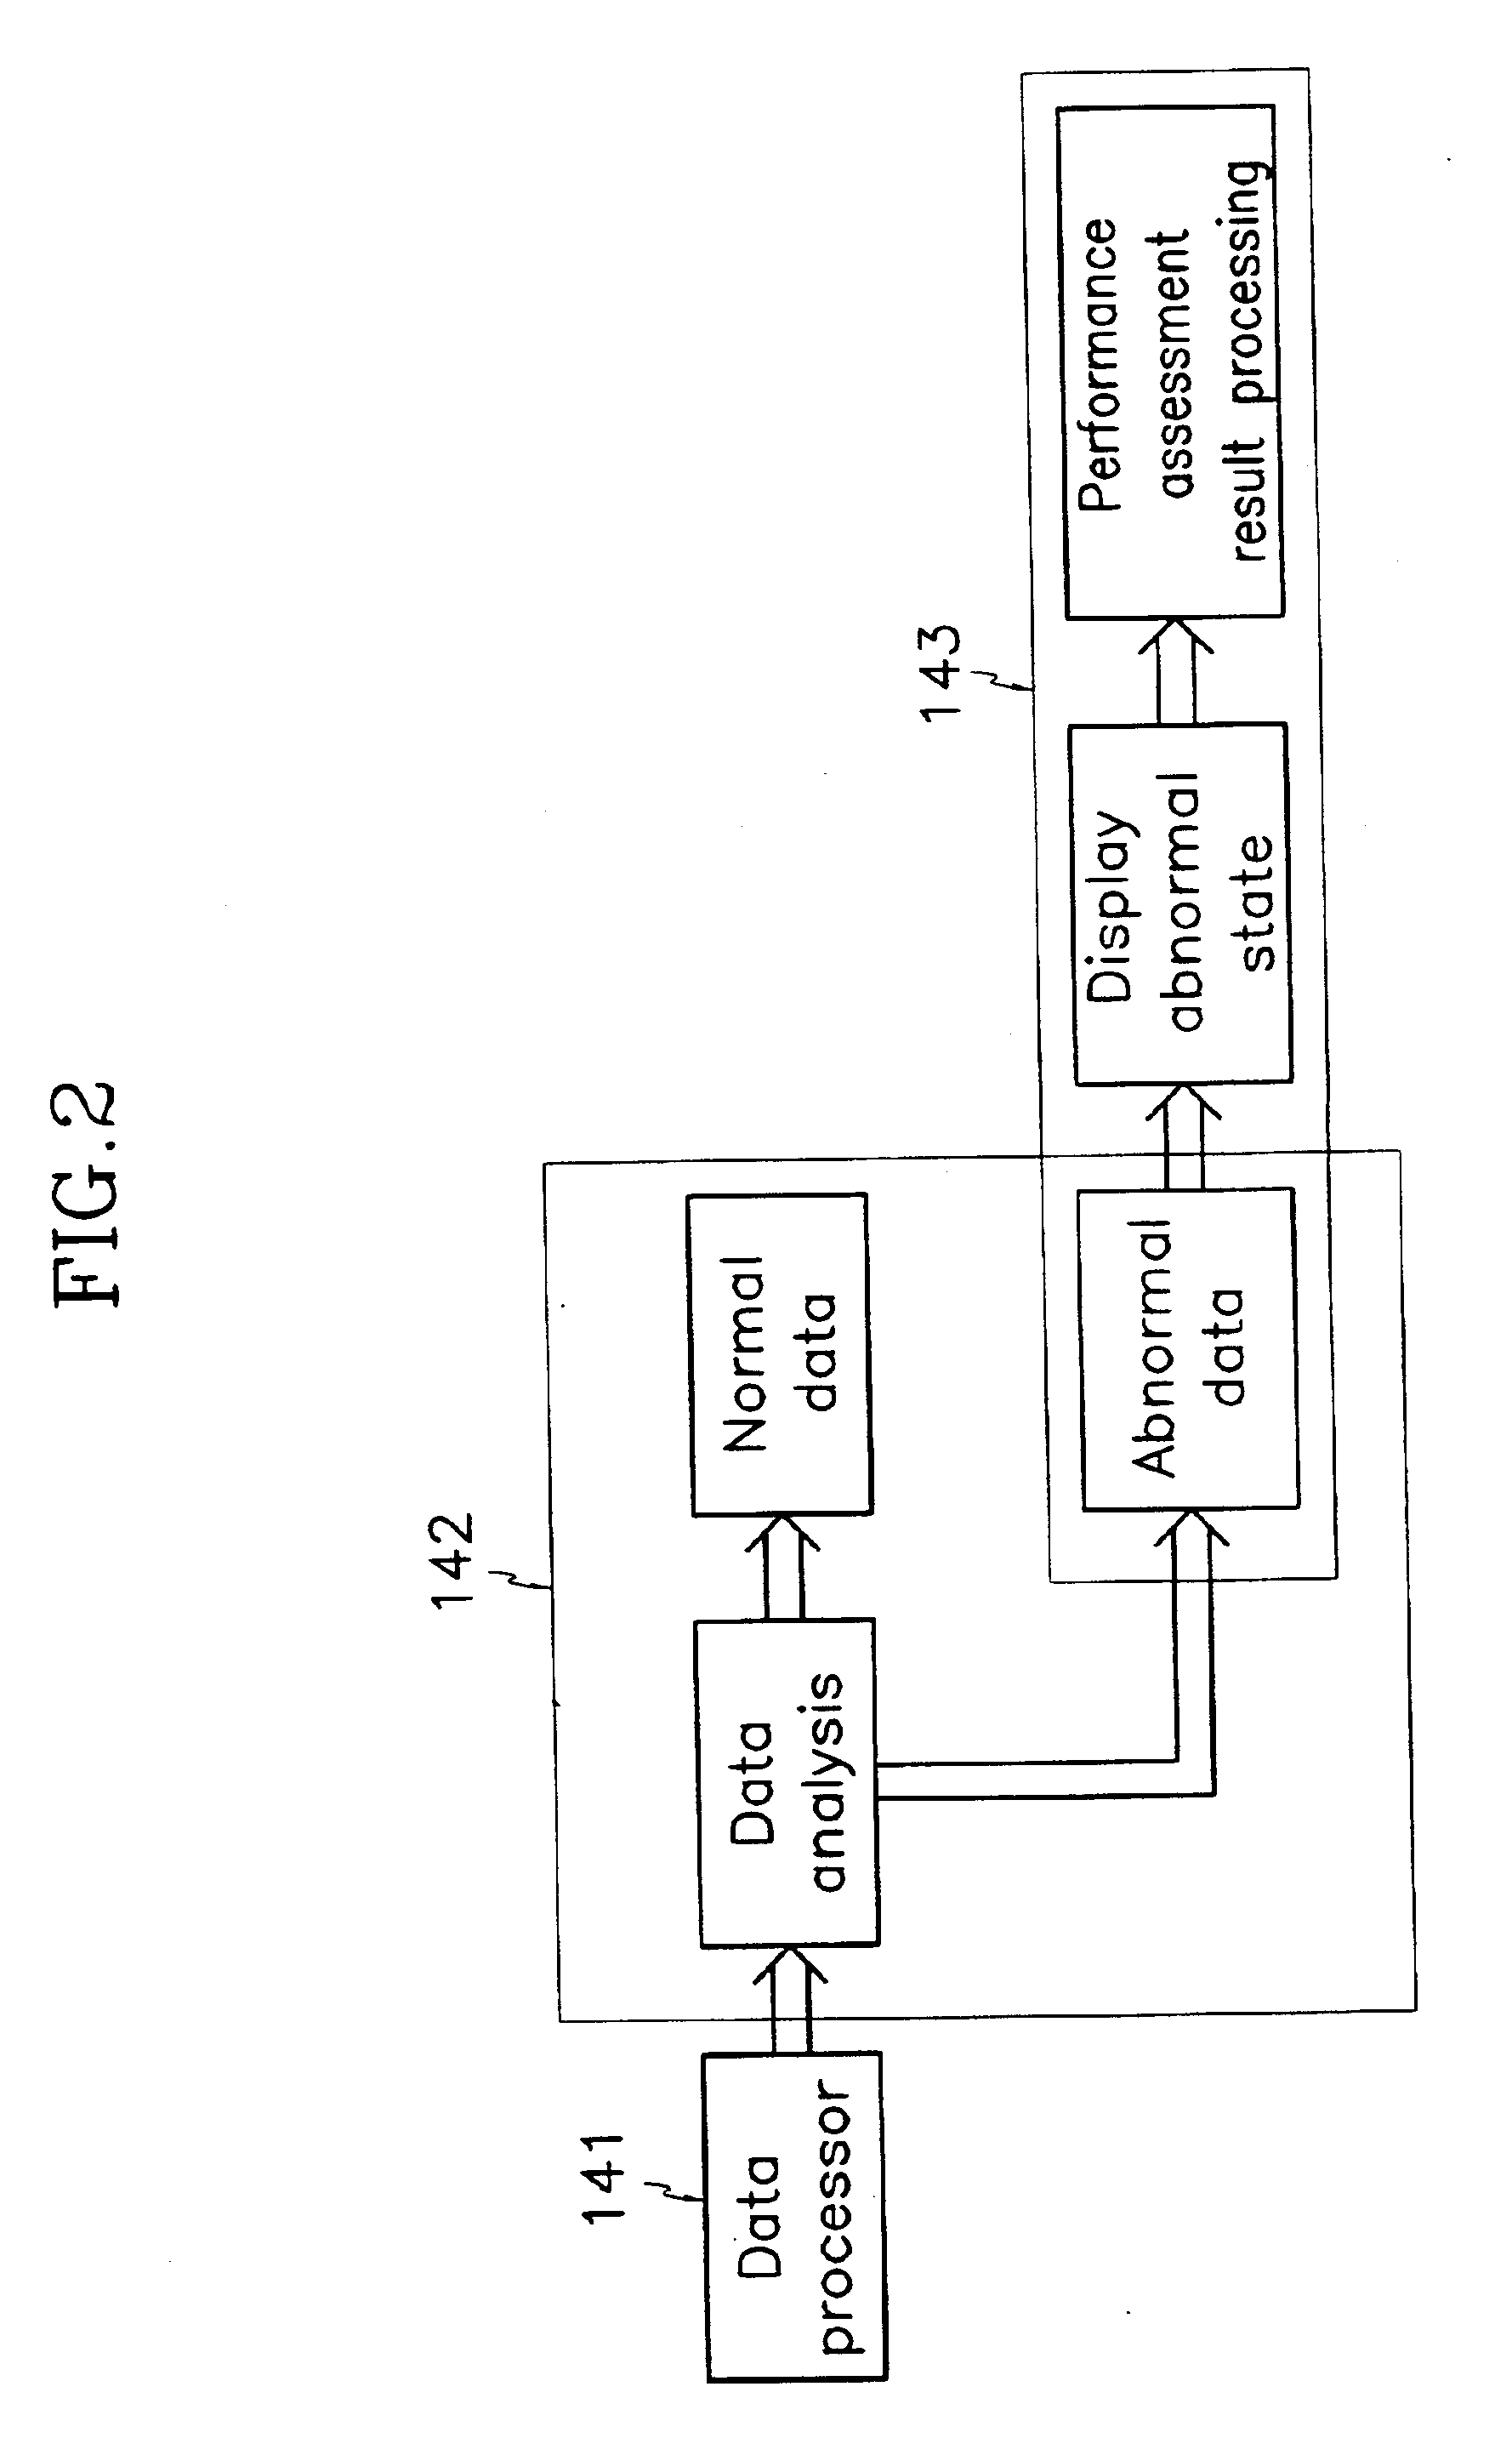 System and method for executing diagnosis of vehicle performance